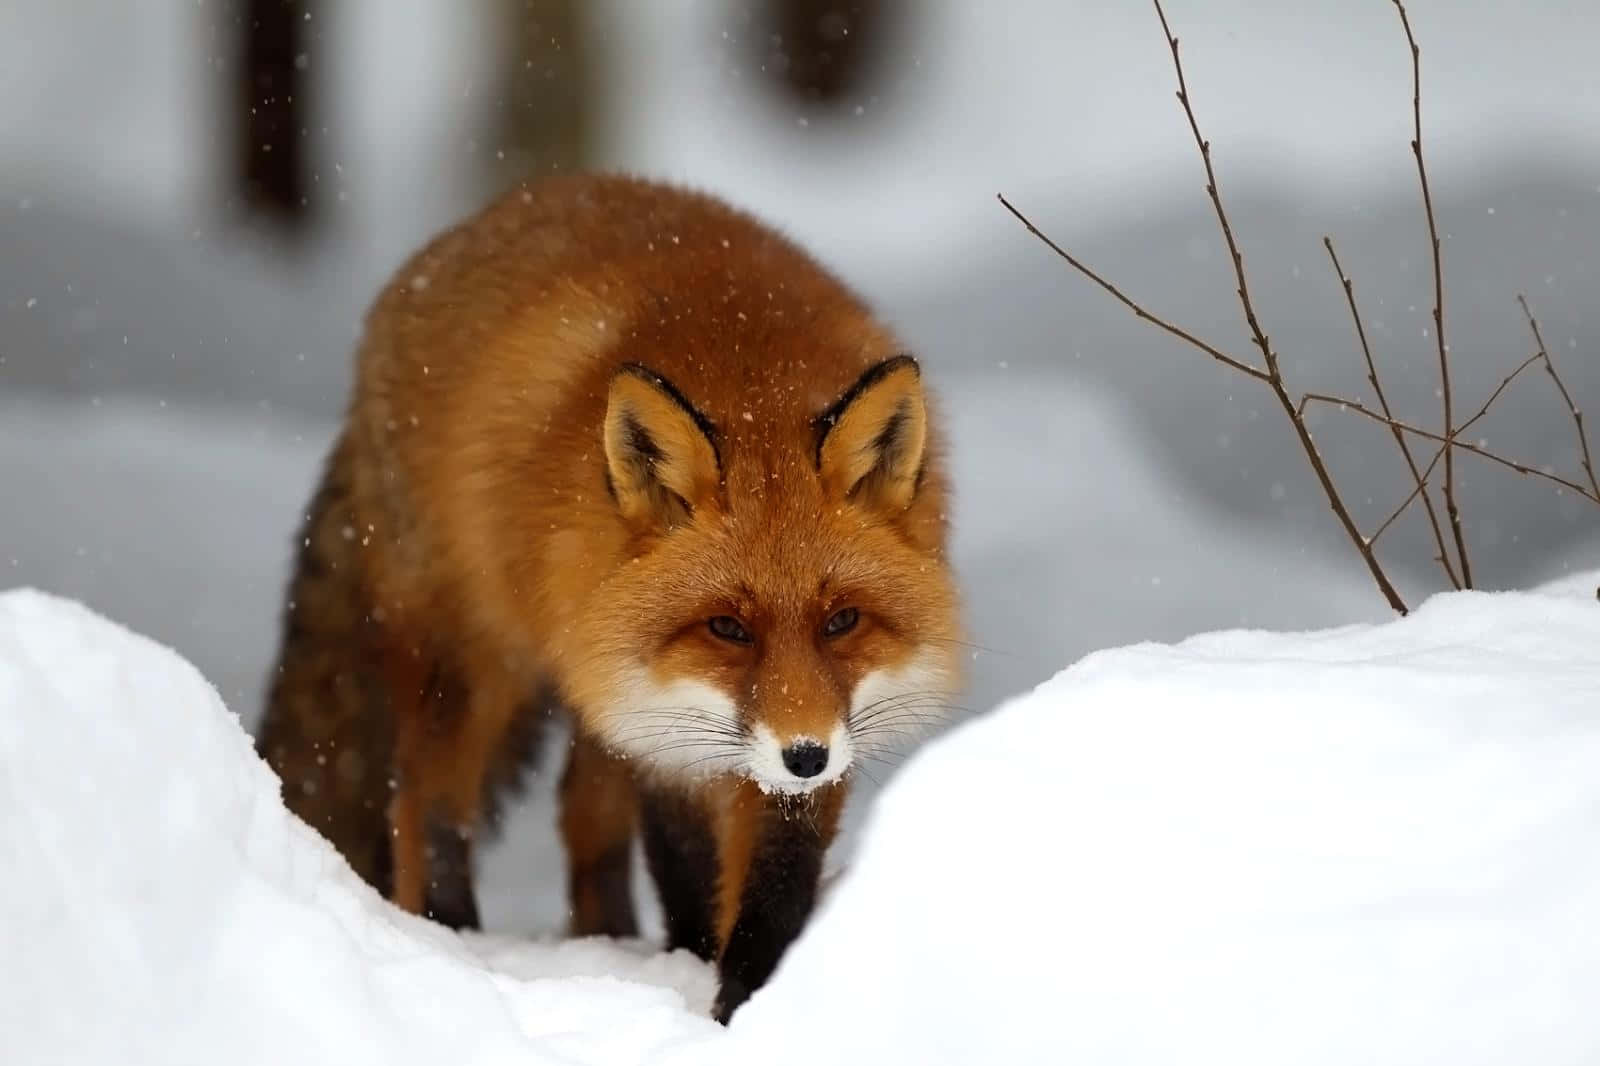 Cool Fox In The Snow Hunting Posture